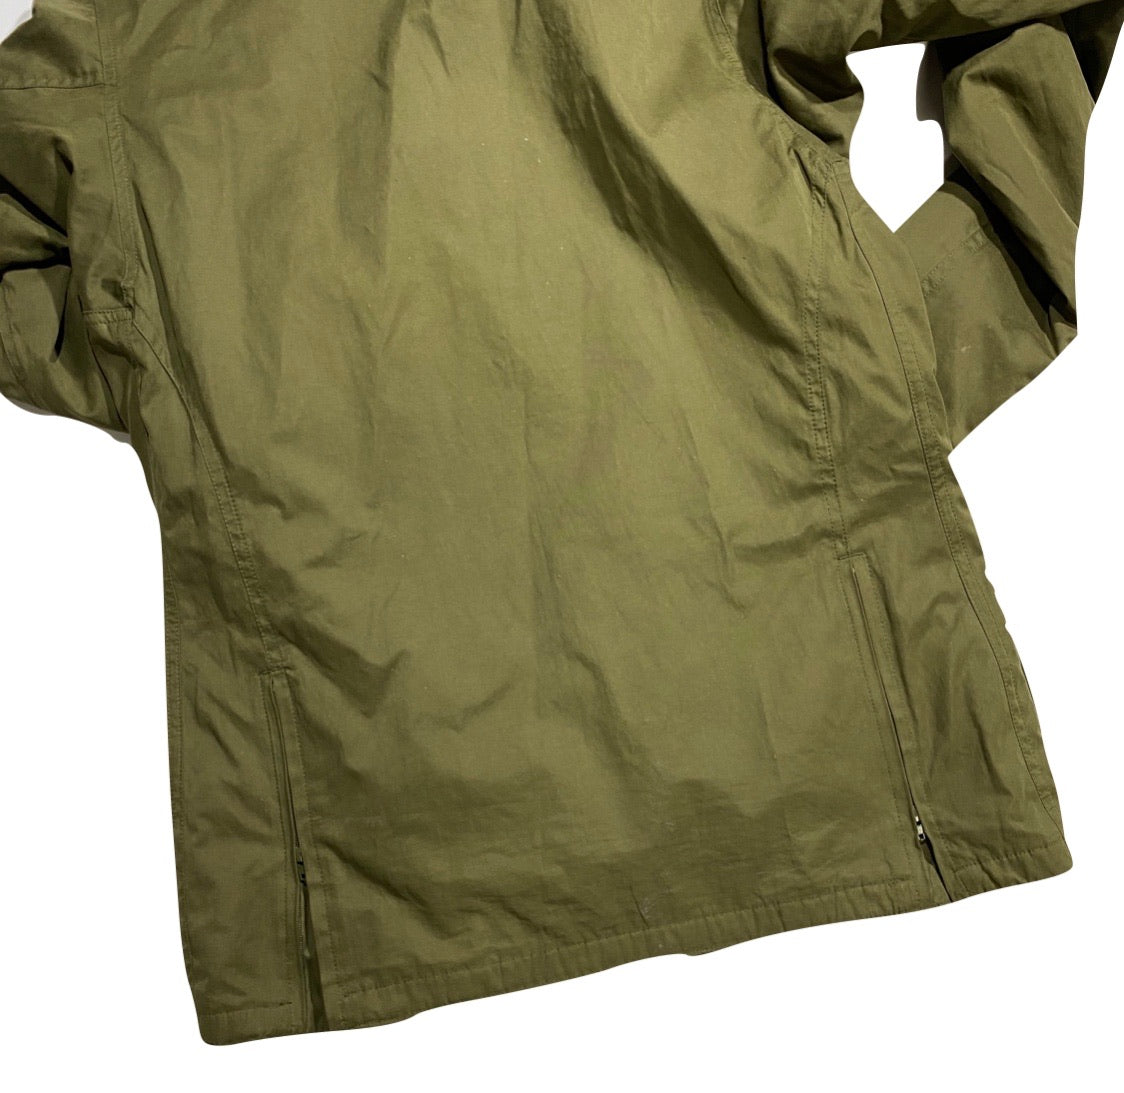 Barbour shooting jacket. S/M